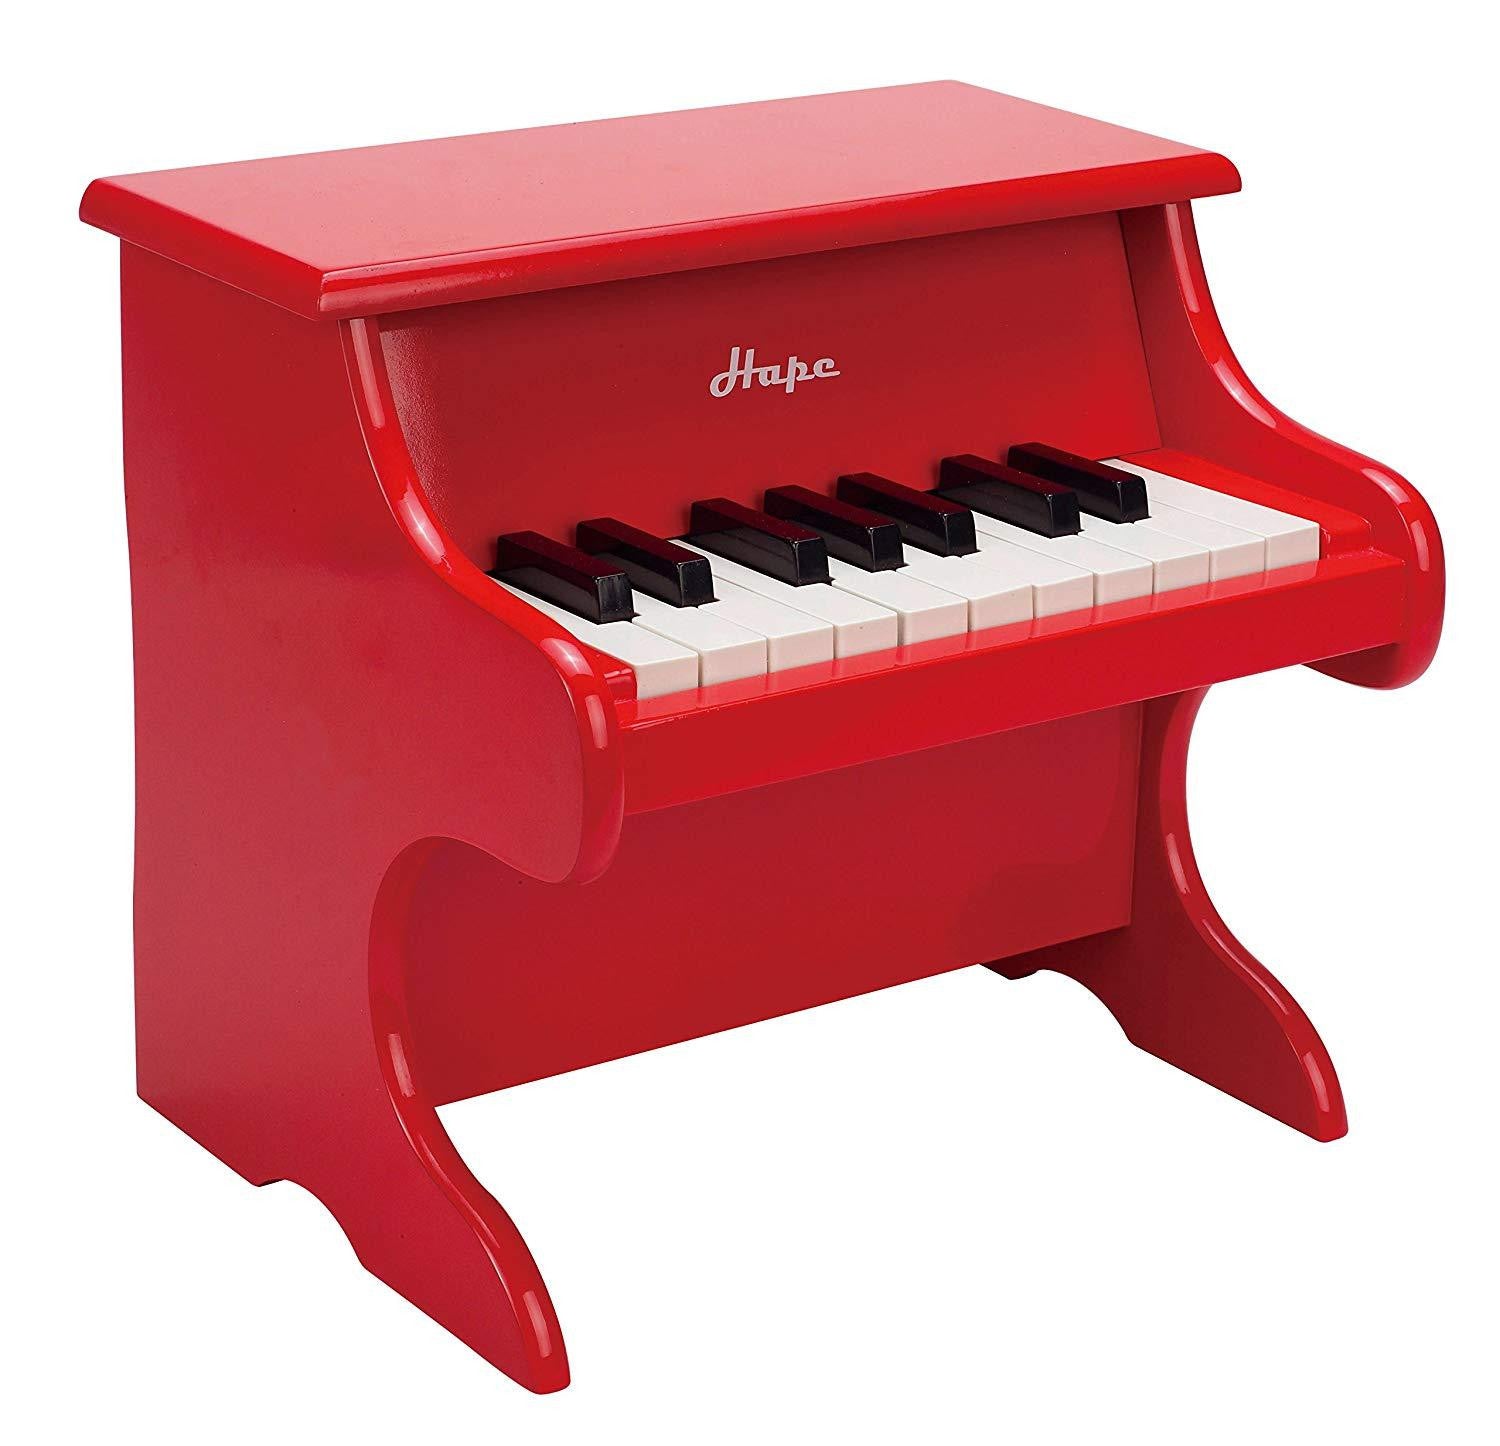 Hape Playful Piano Suitable for Children 3 Years and Above